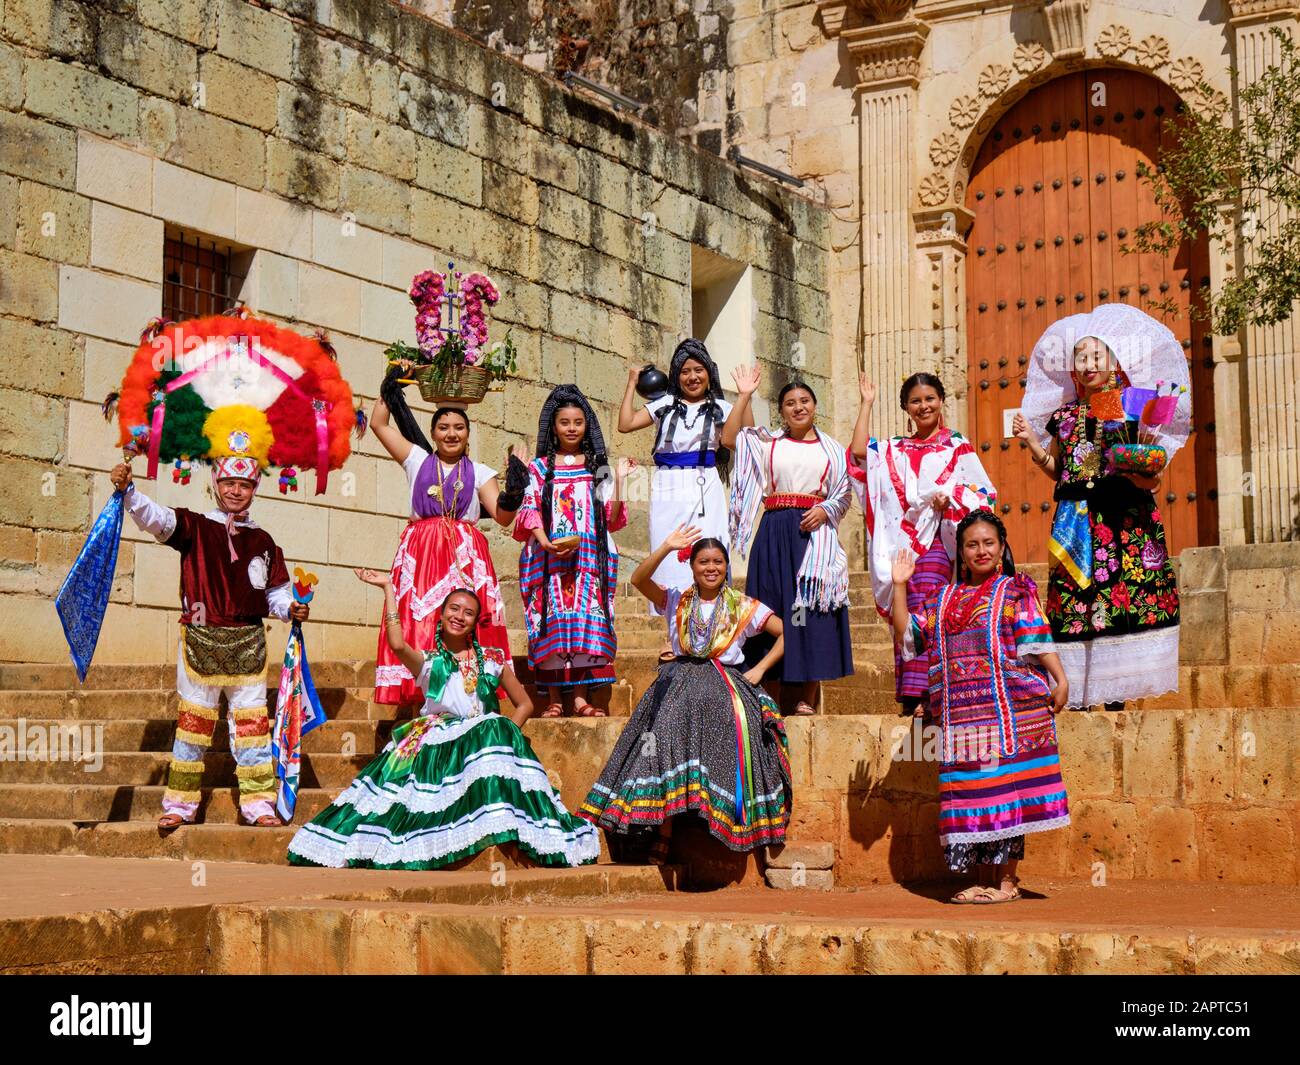 Group of people in traditional Mexican clothing posing and waving in midday sun at door of large church Stock Photo